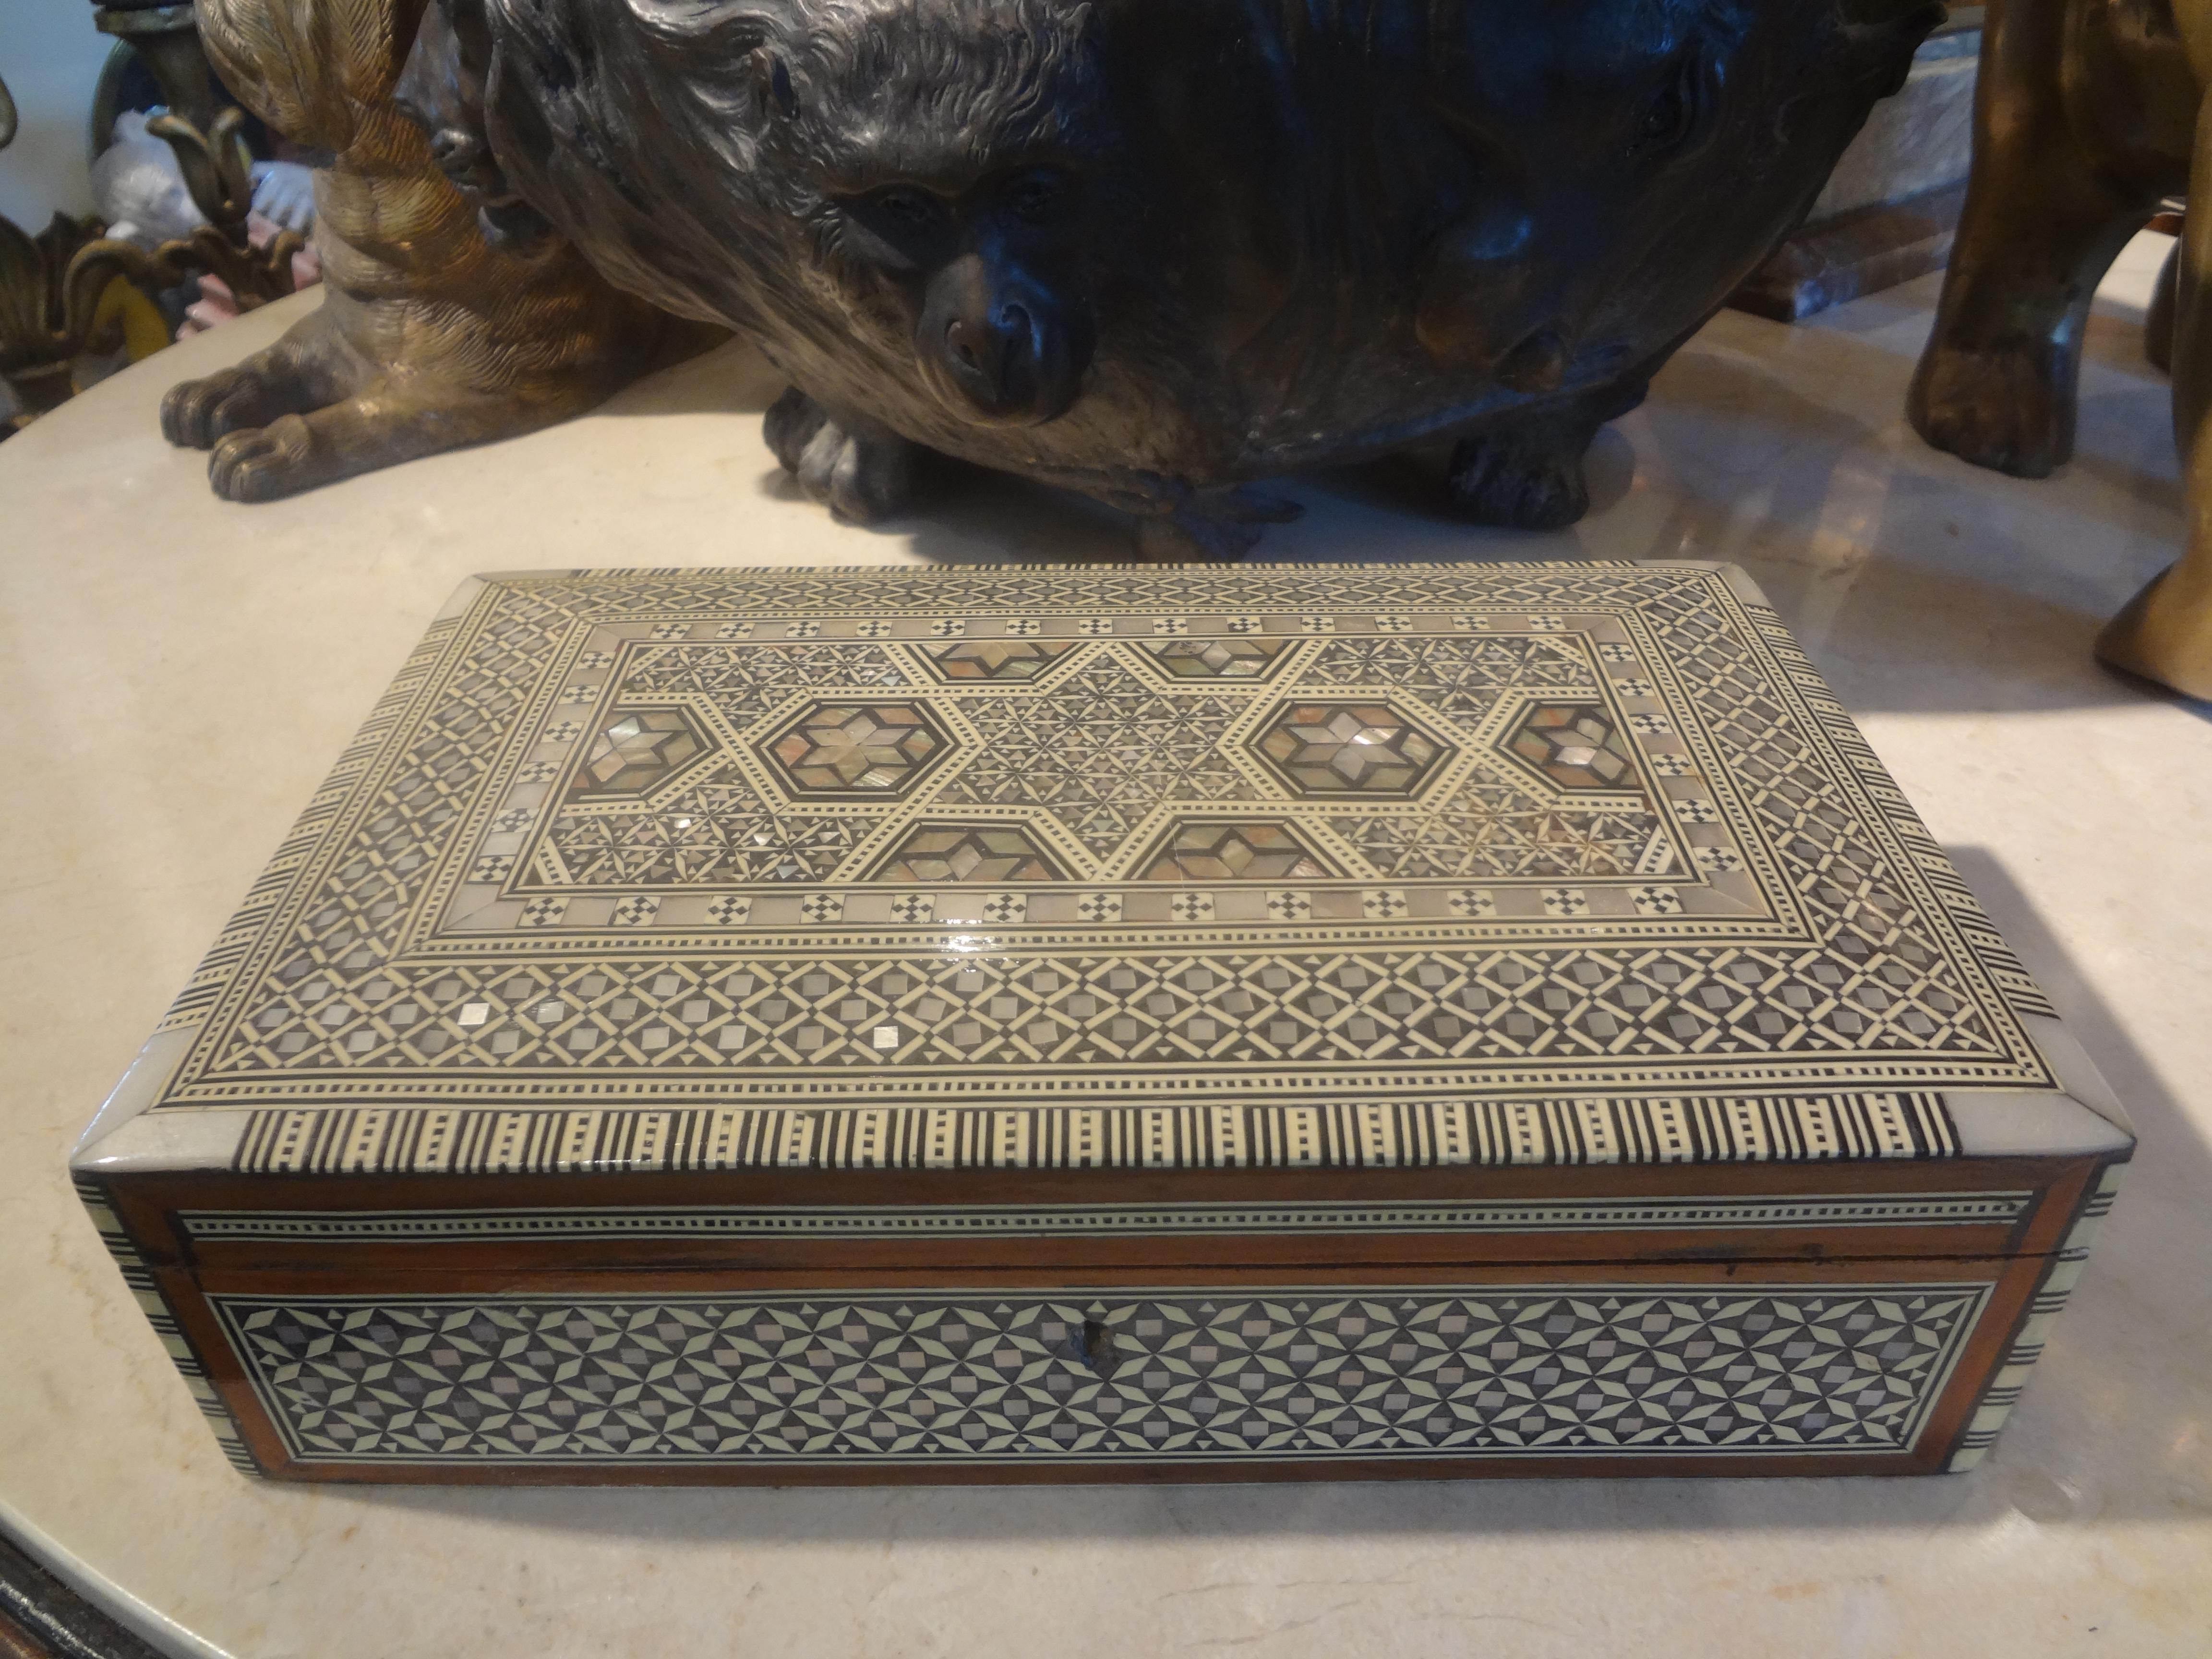 Moroccan Middle Eastern/Moorish Decorative Box of Inlaid Woods and Mother-of-pearl